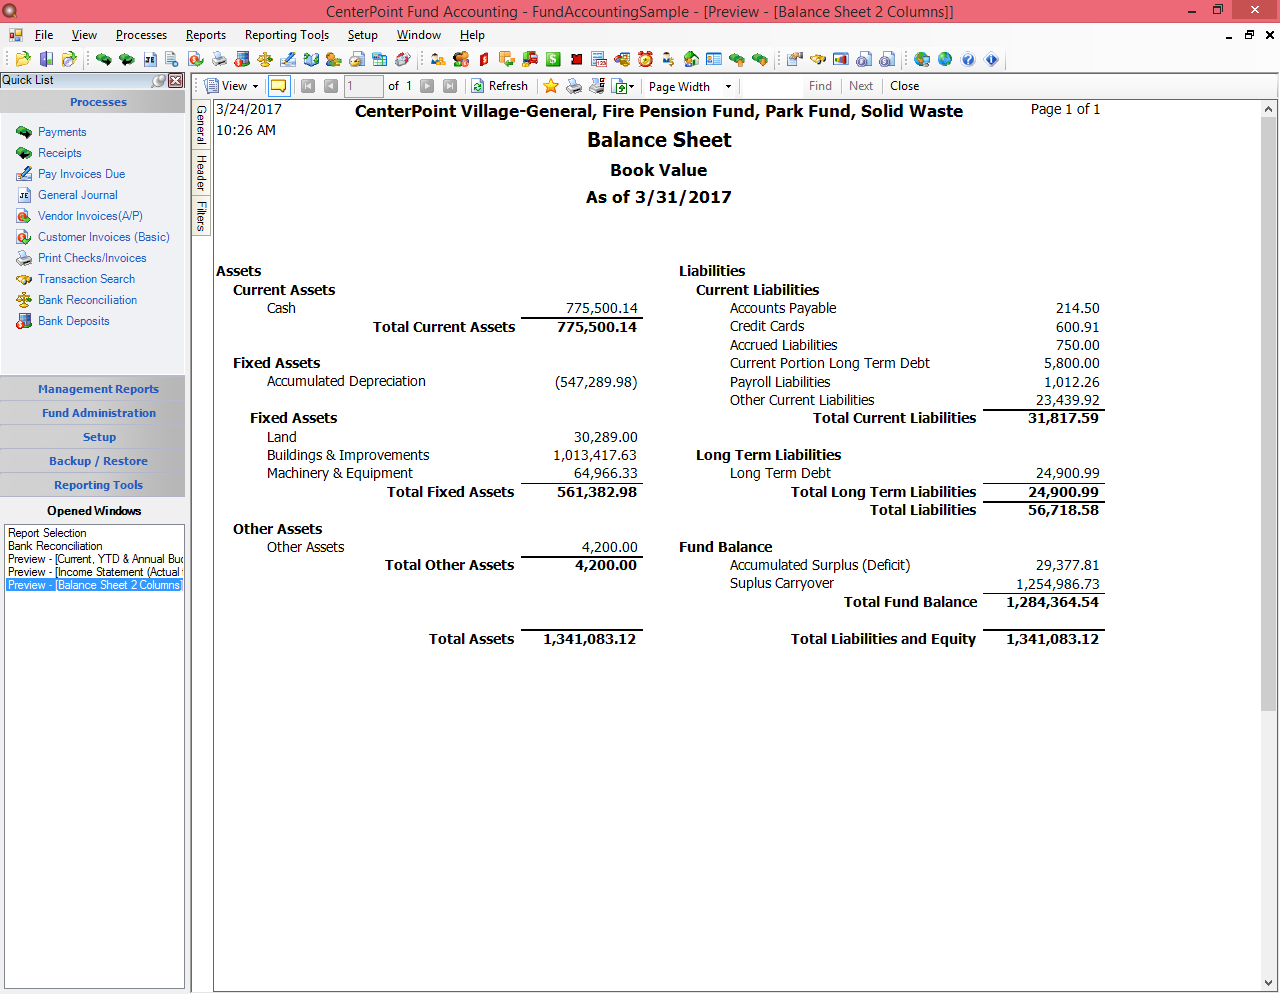 CenterPoint Fund Accounting for Municipals balance sheet